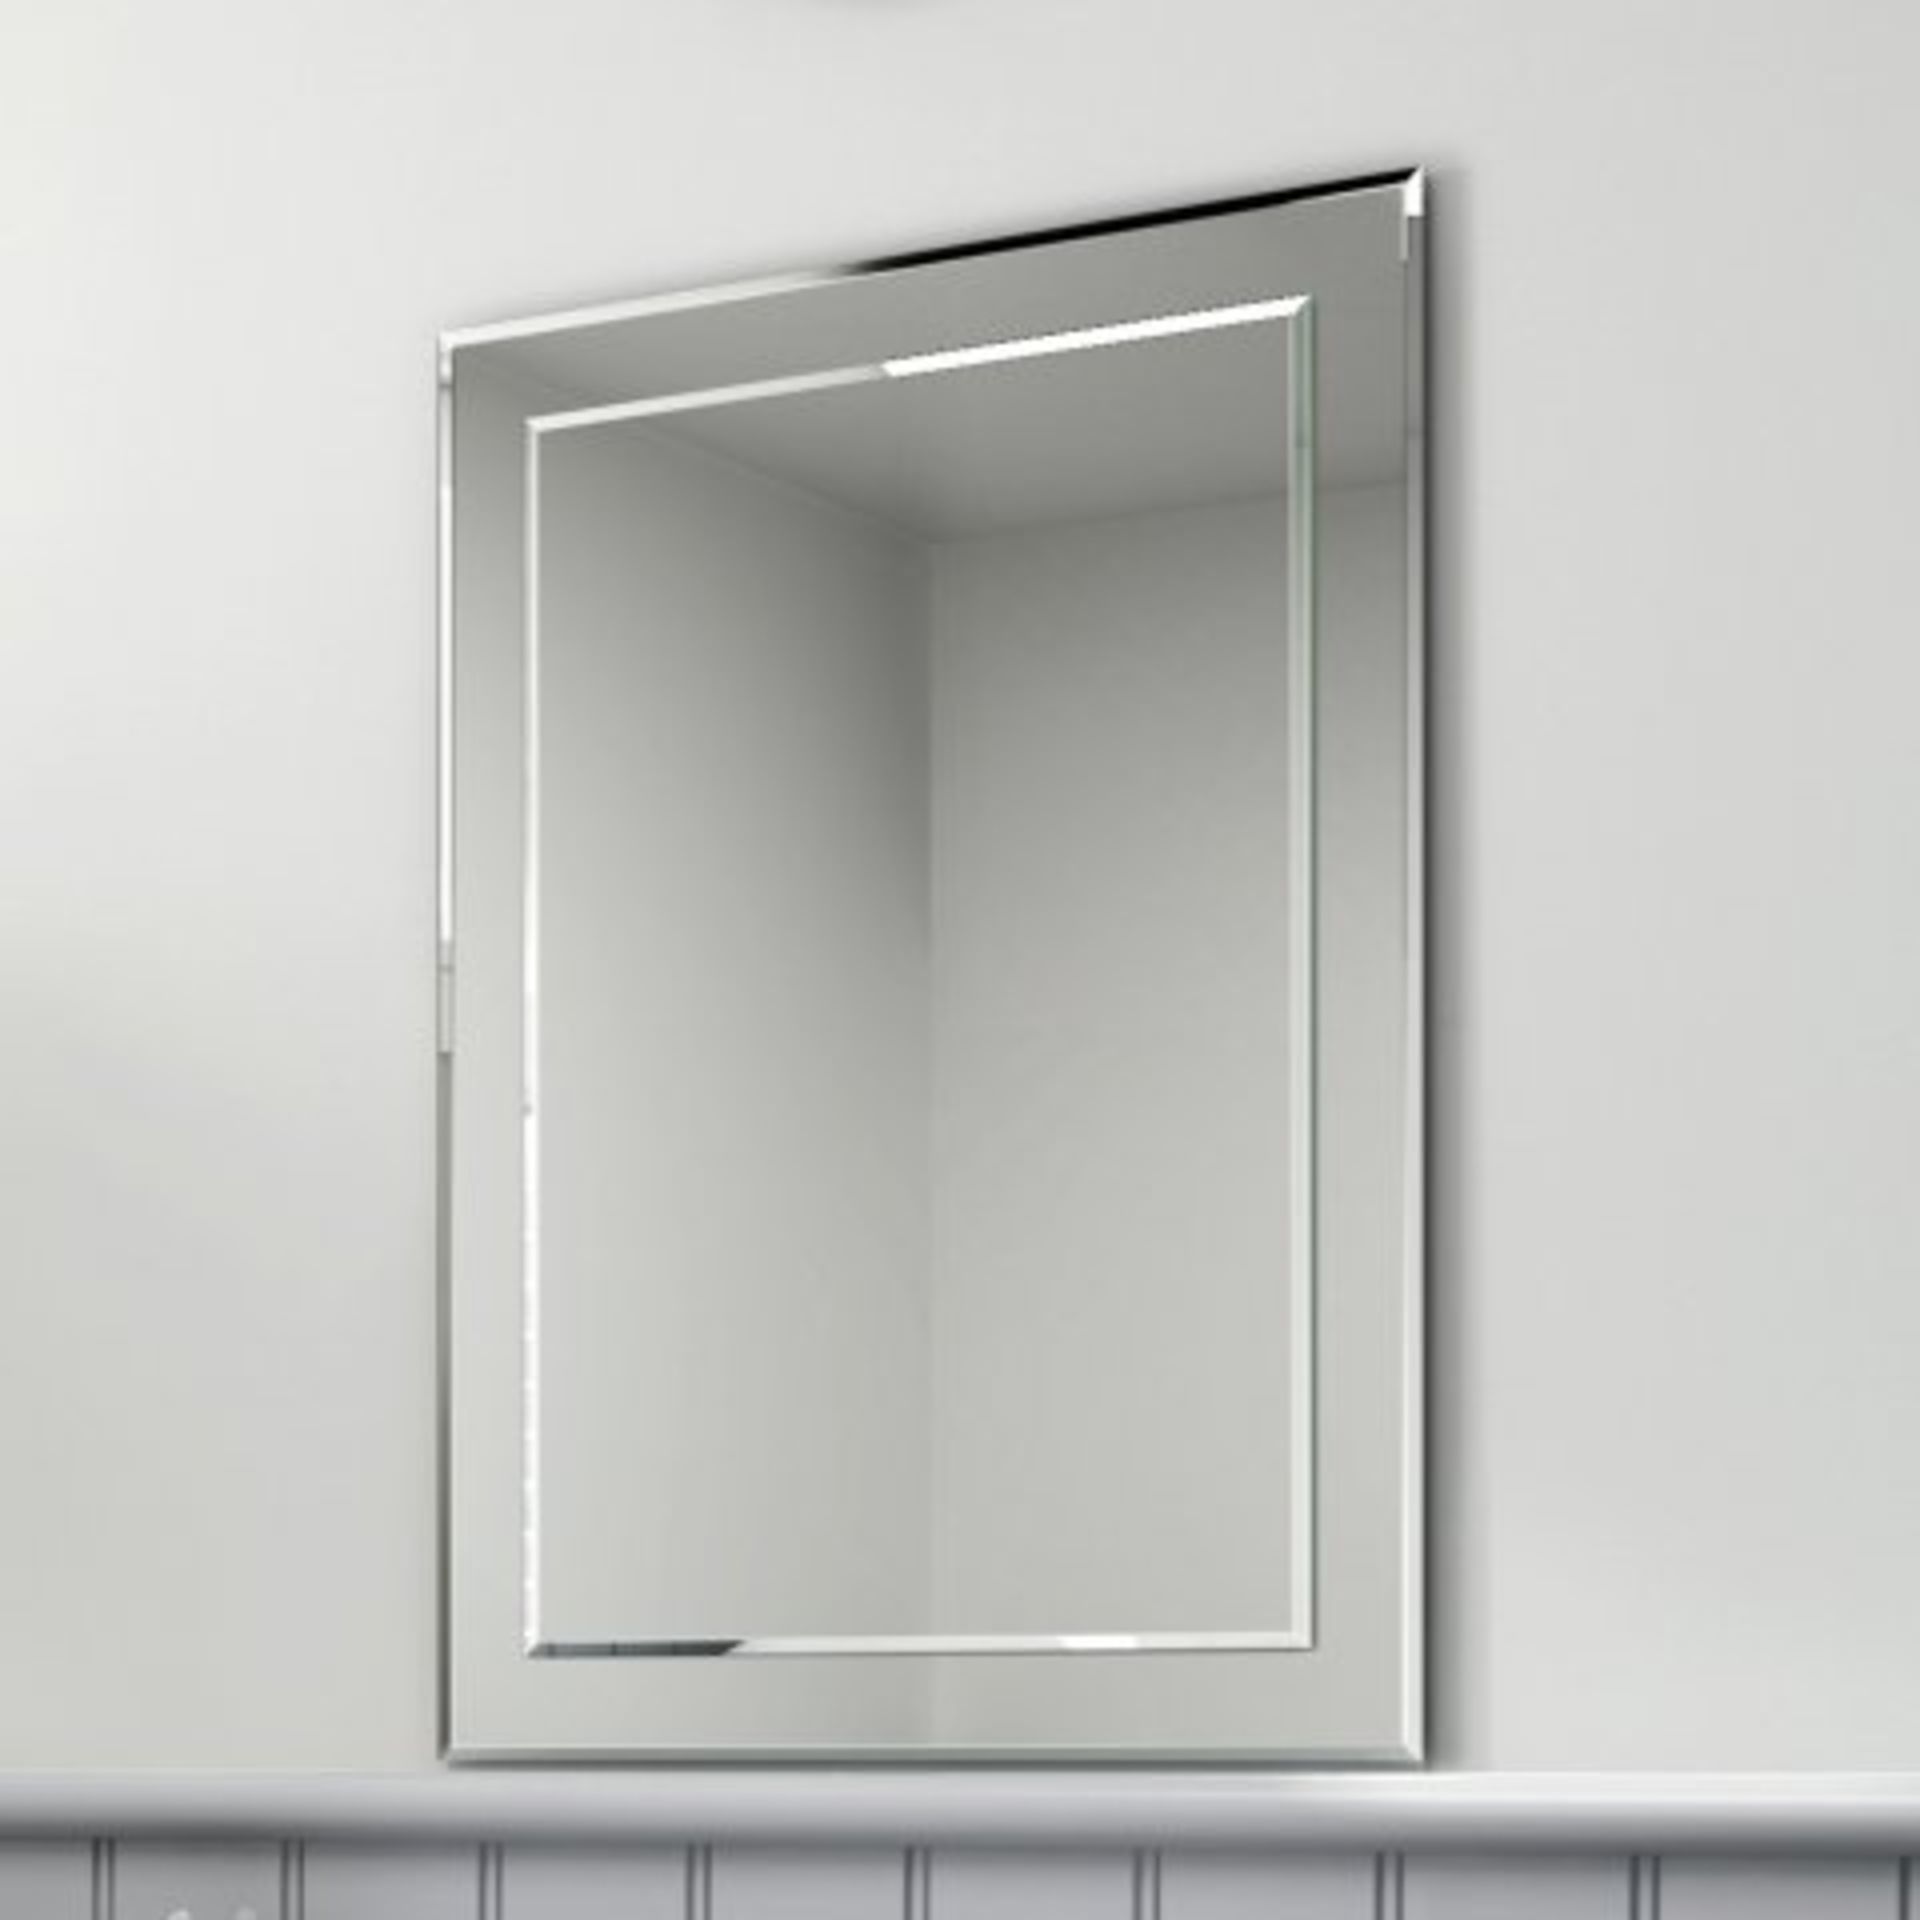 (H218) 500x700mm Bevel Mirror. RRP £199.99 Enjoy reflection perfection with our 500x700 Bevel Mirror